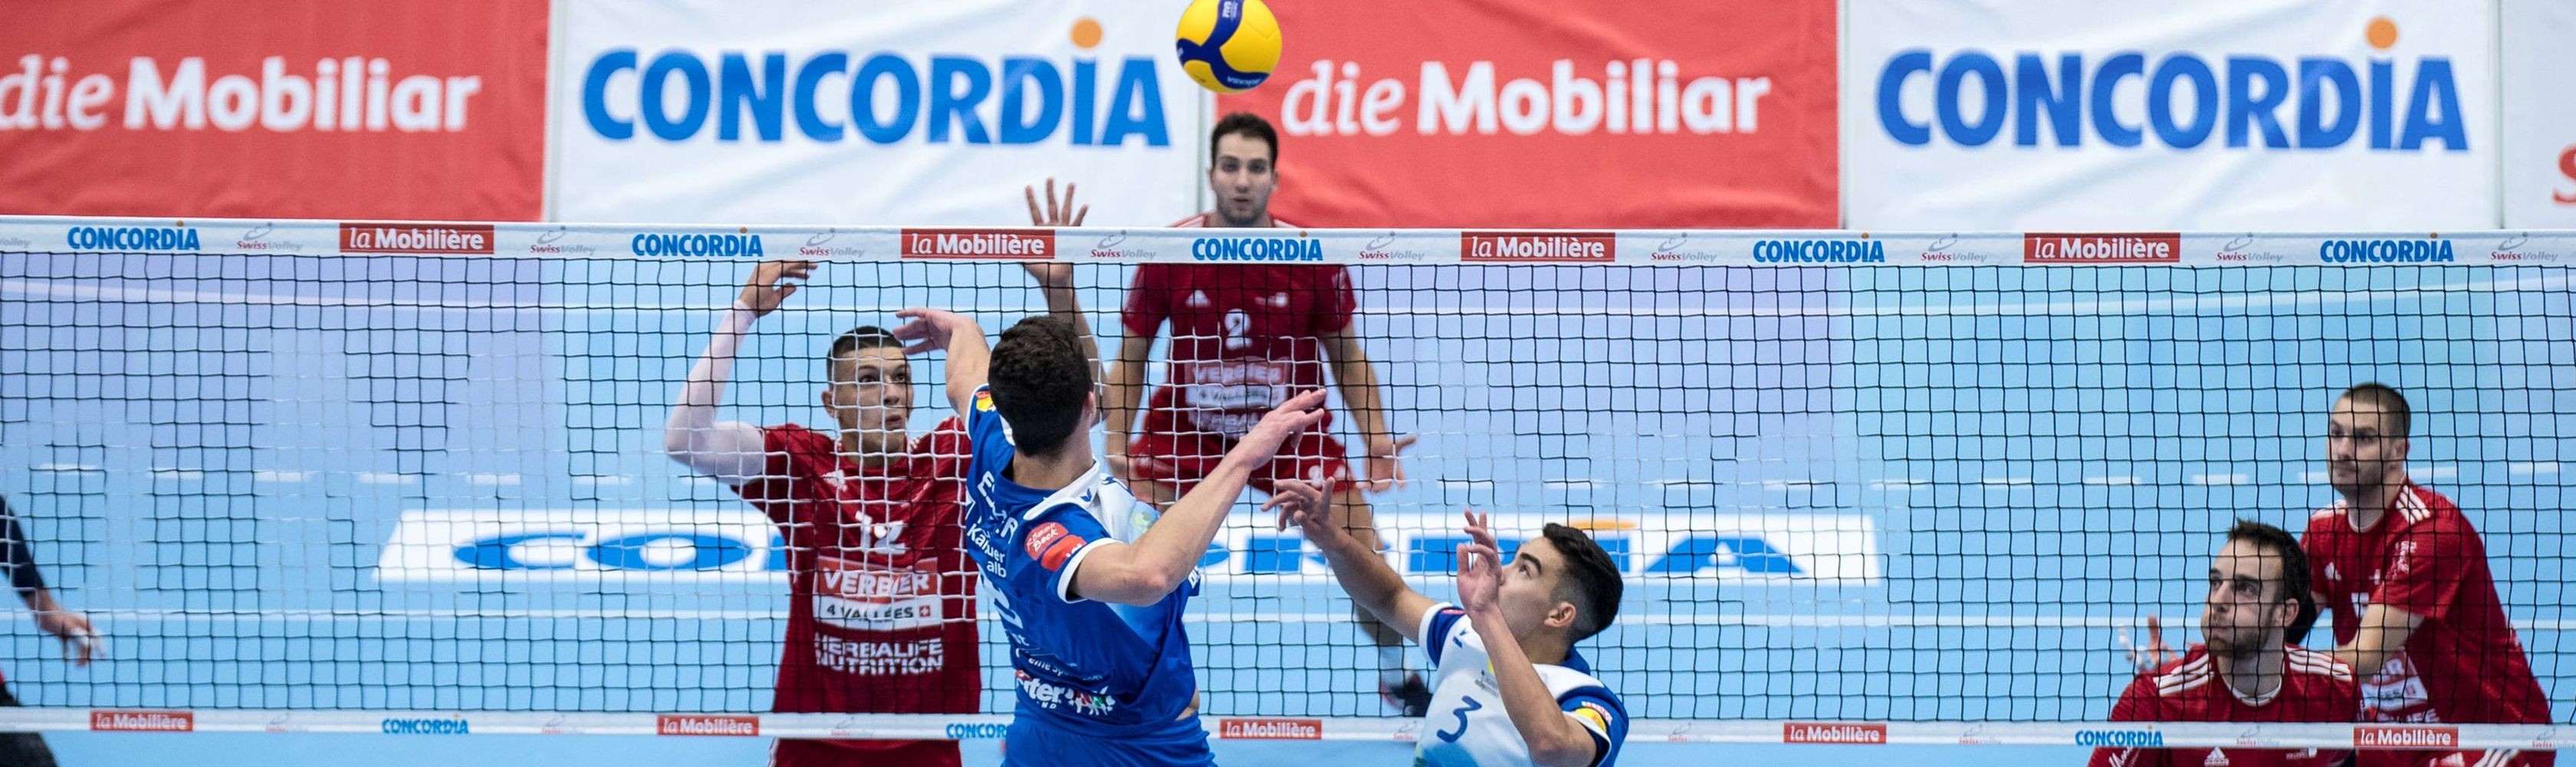 CONCORDIA is official partner from Swiss Volley